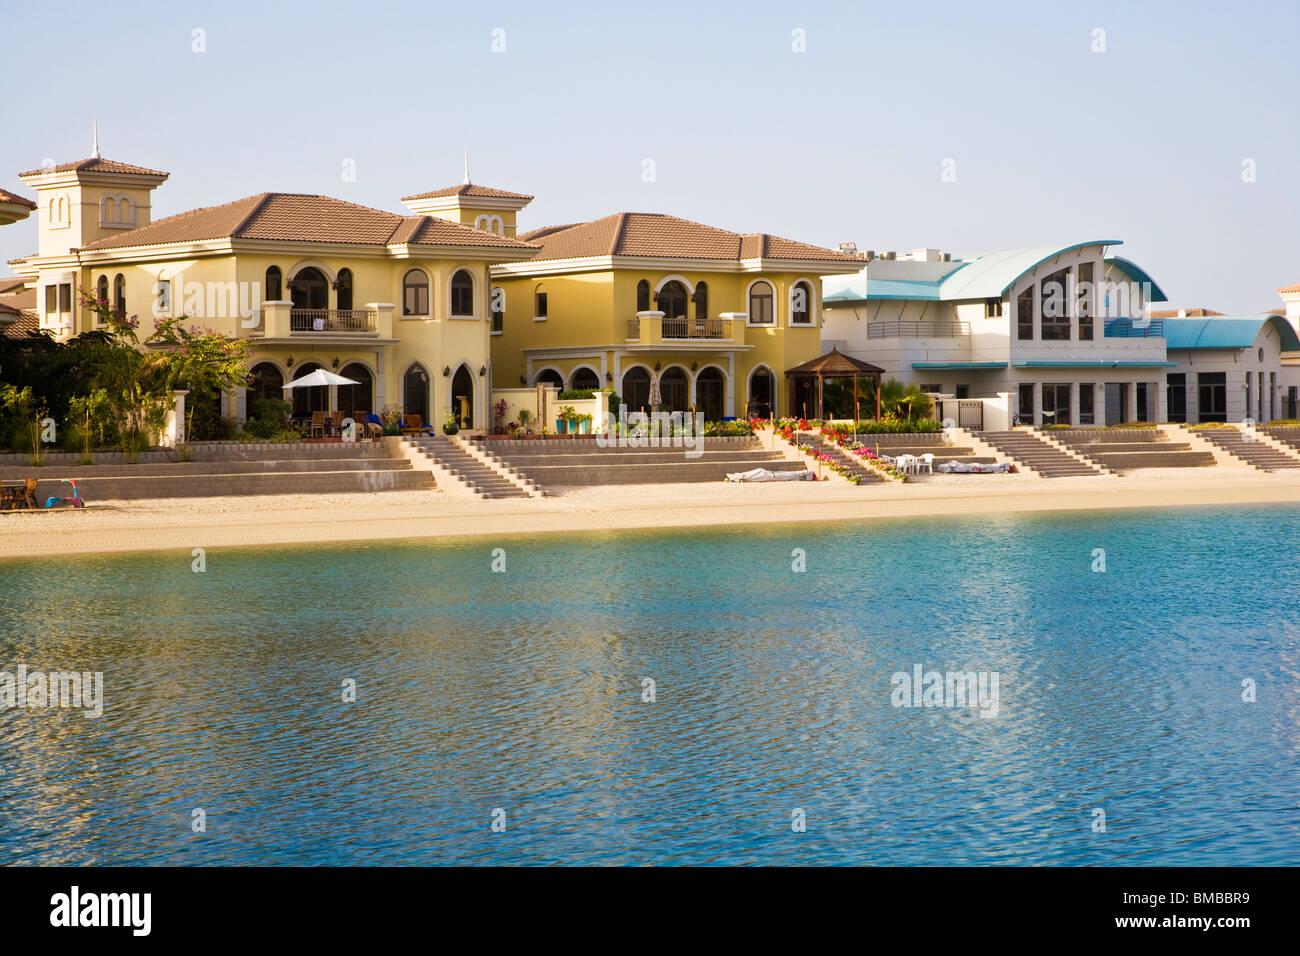 Grand villas along one of the fronds on the Palm Island Jumeirah in Dubai Stock Photo